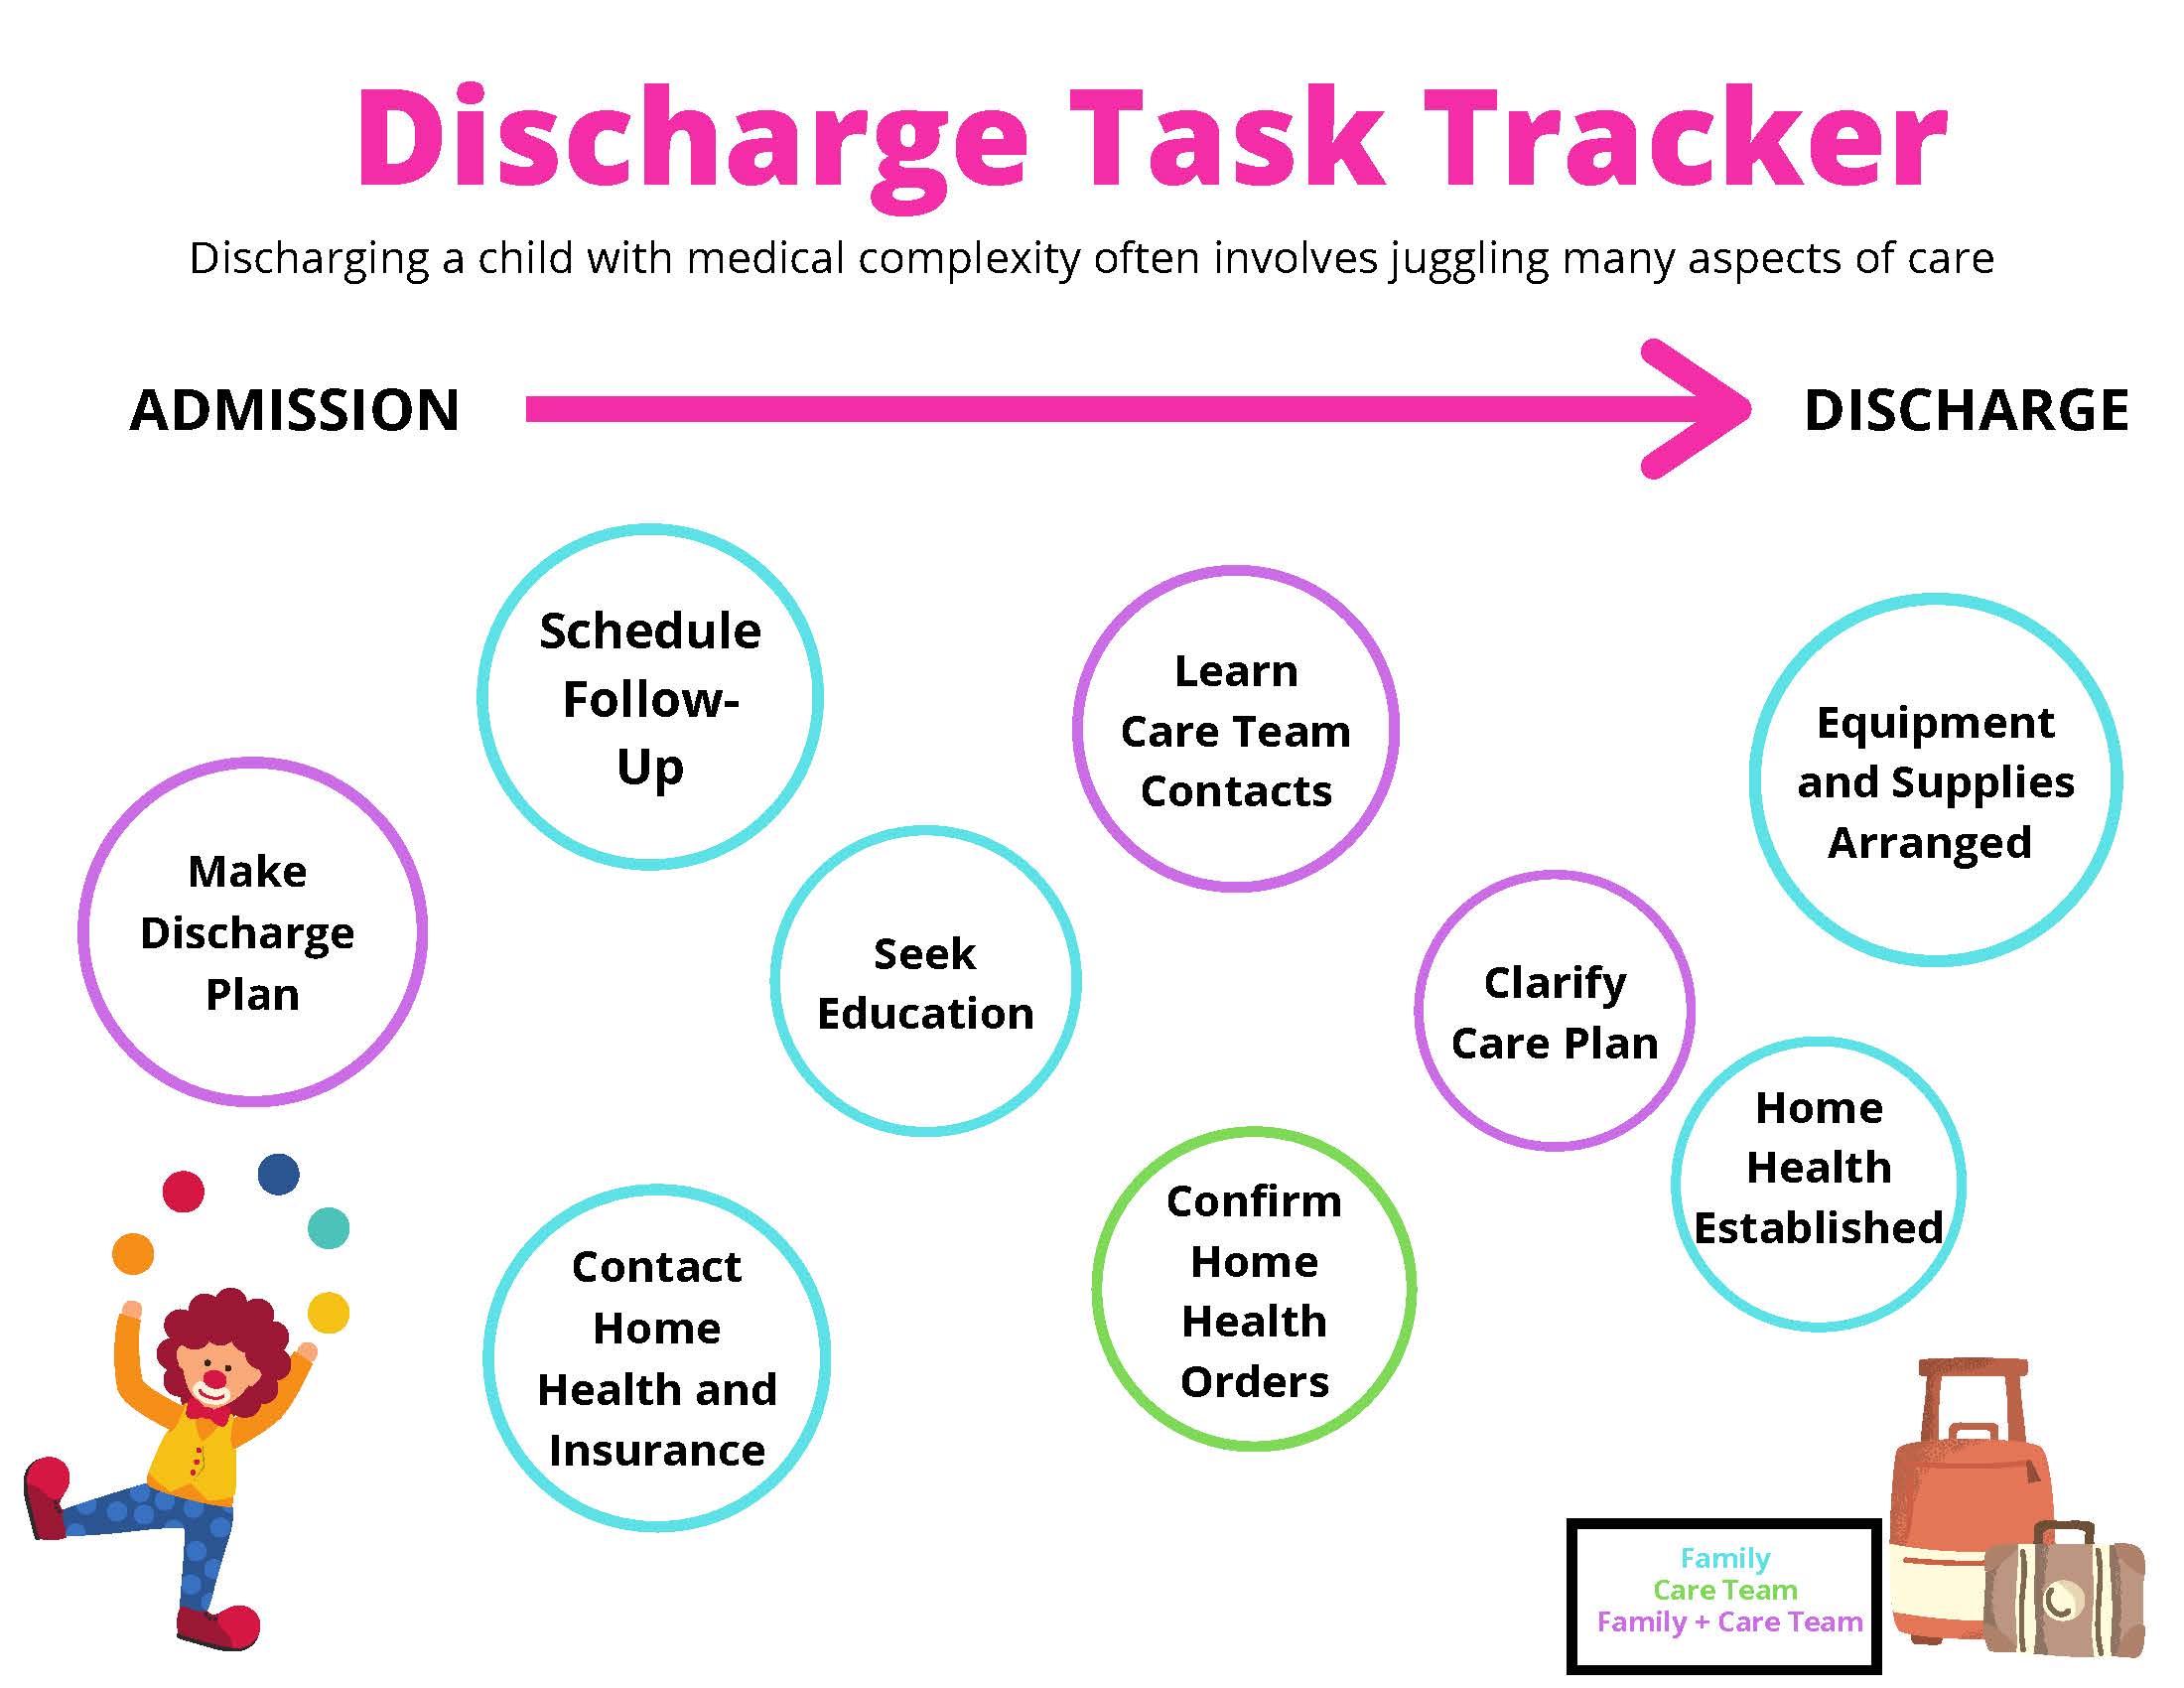 Discharge tracker tool shows tasks that need to be completed as circles scattered across a page